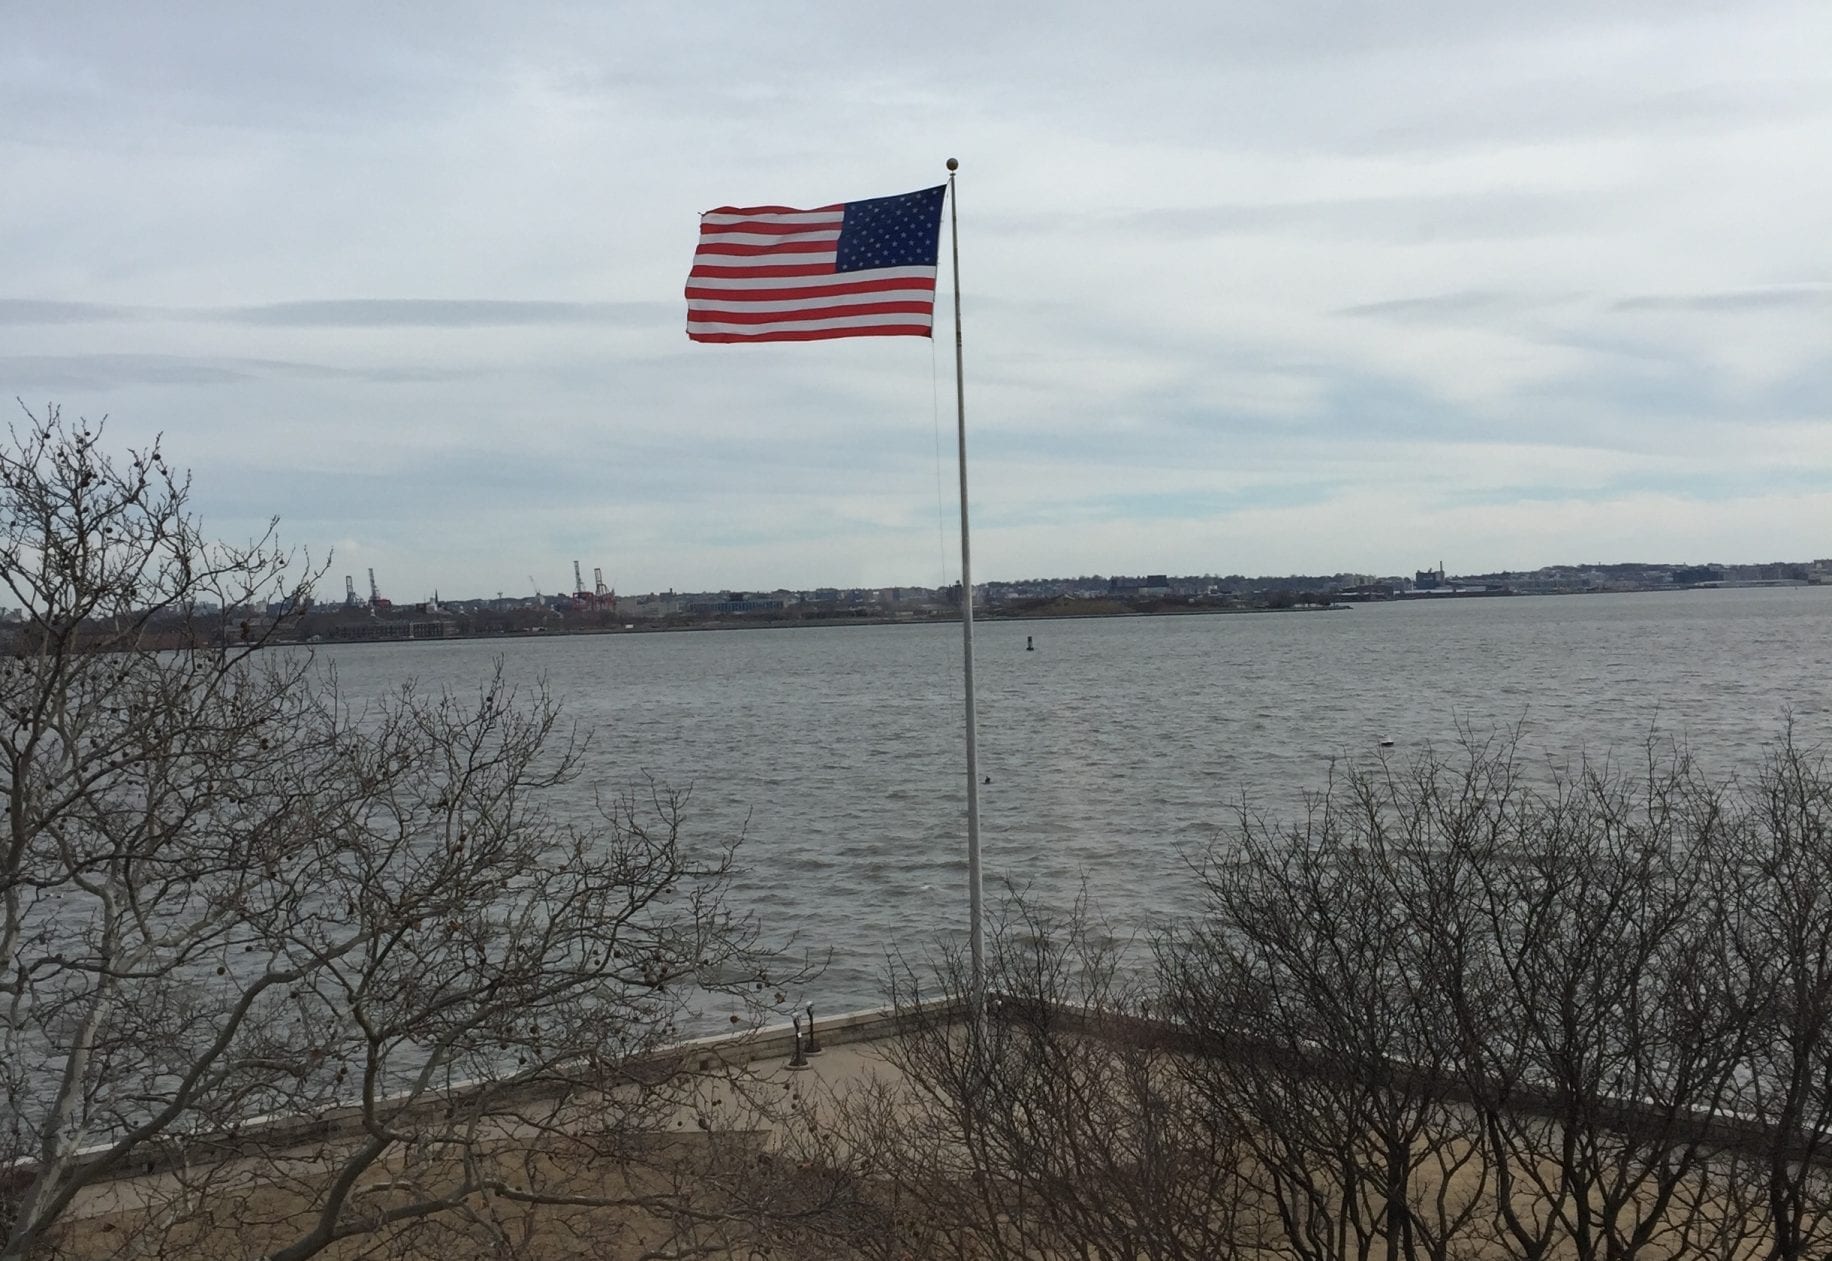 Presidents and the economy: American flag flying in front of the ocean